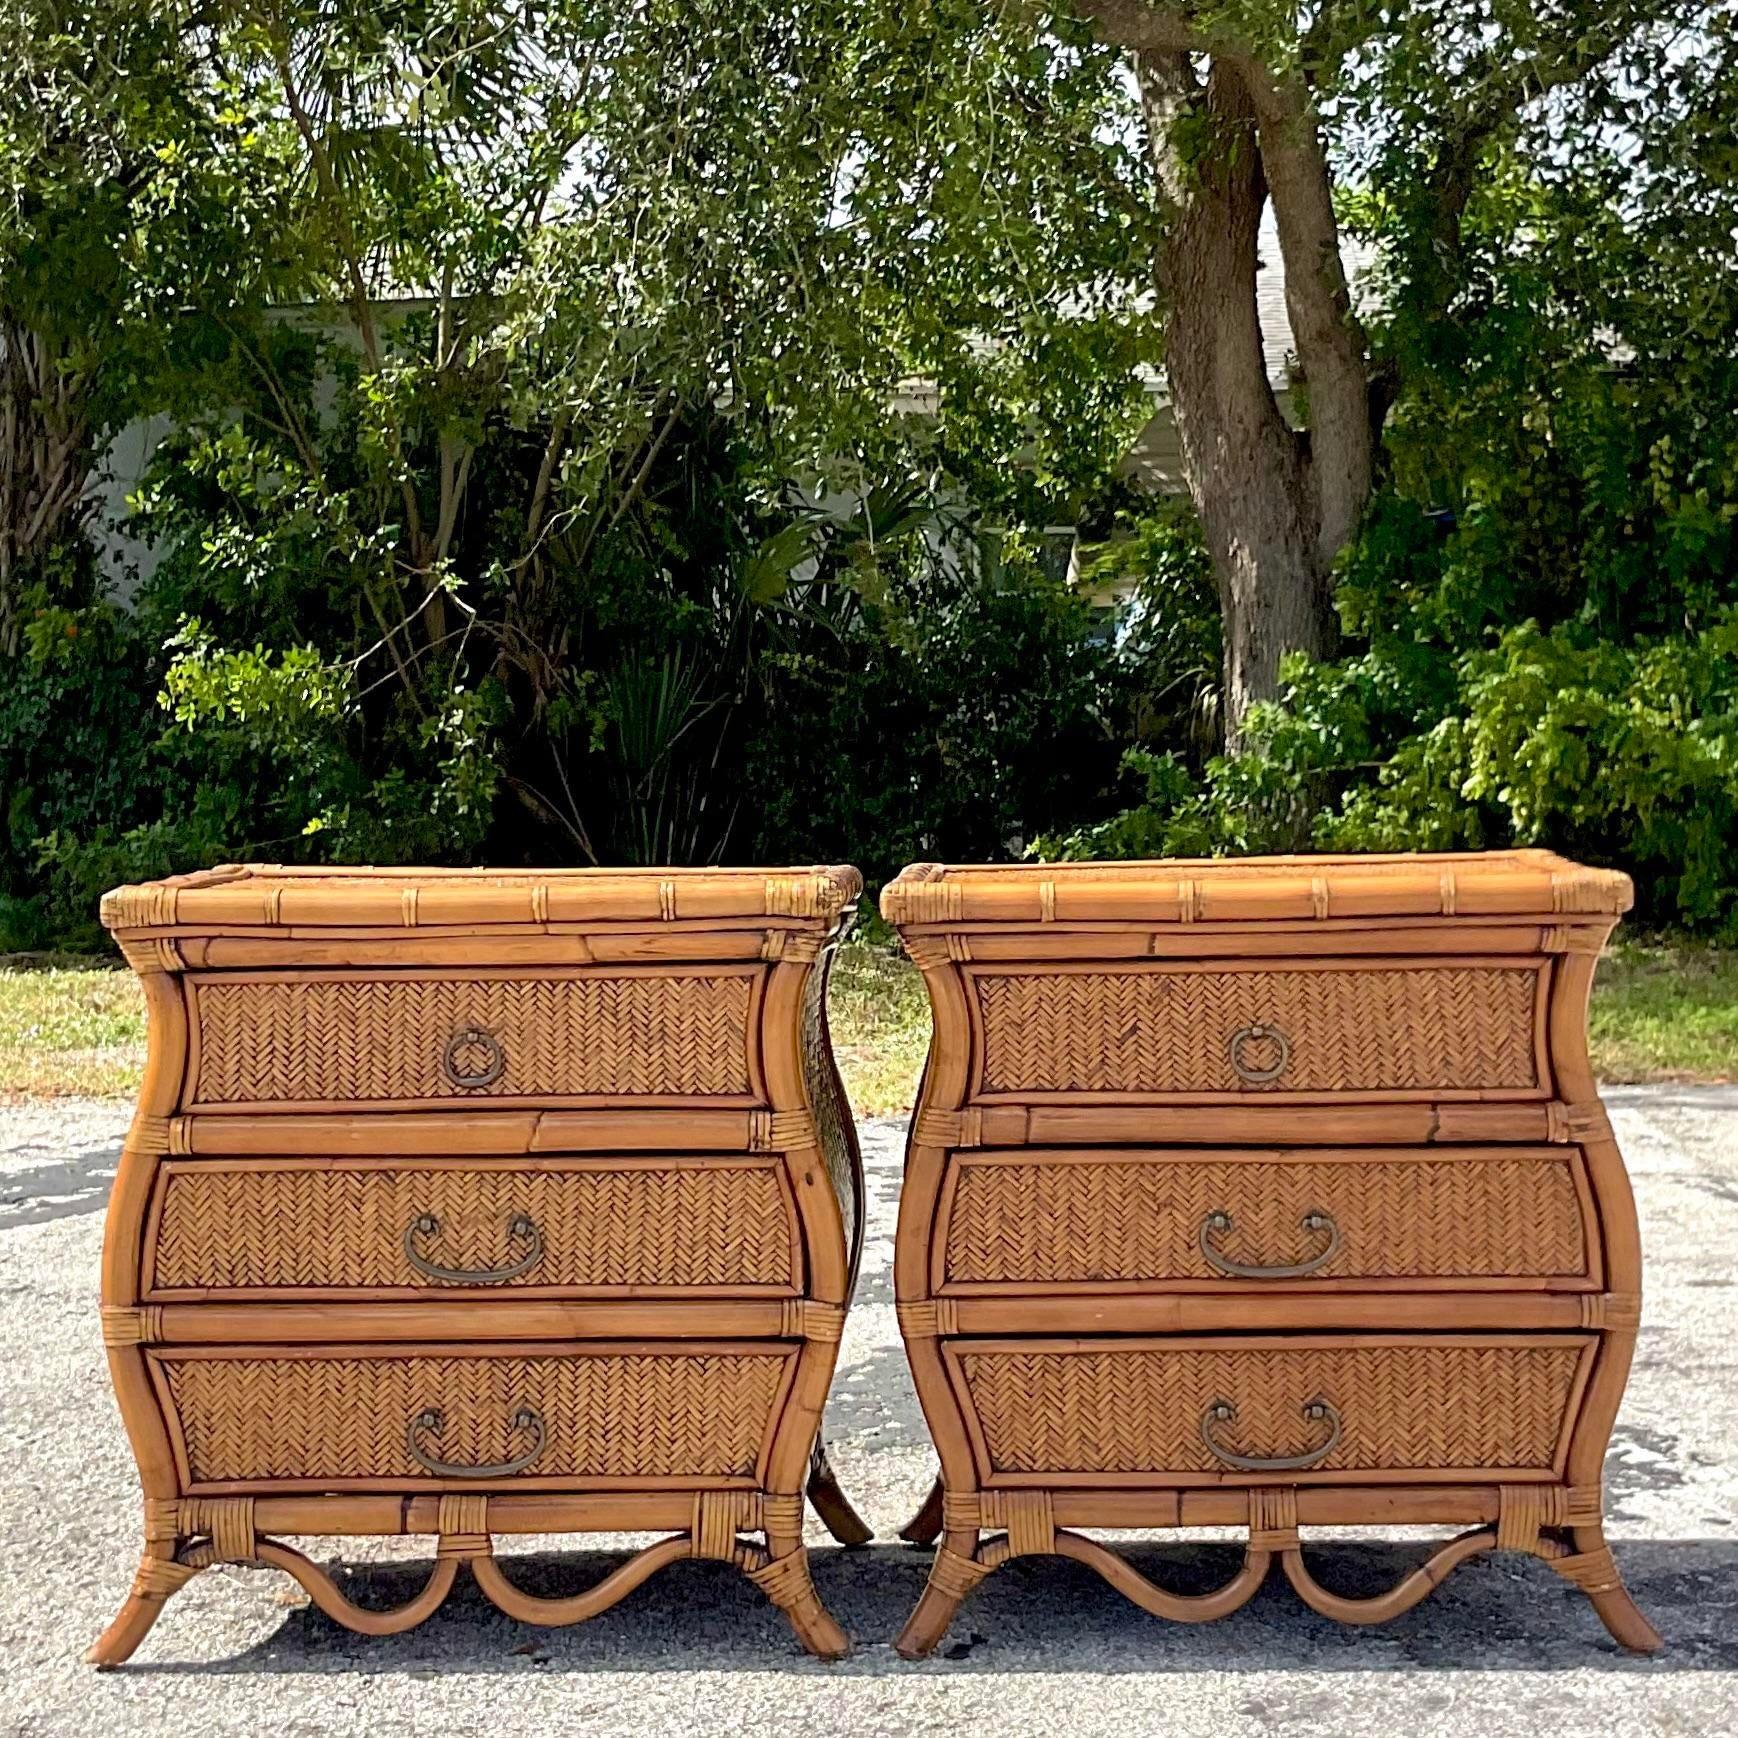 A fabulous pair of vintage Coastal nightstands. A chic woven rattan in a gorgeous wave shape. Rattan trimmed edges. Acquired from a Palm Beach estate.